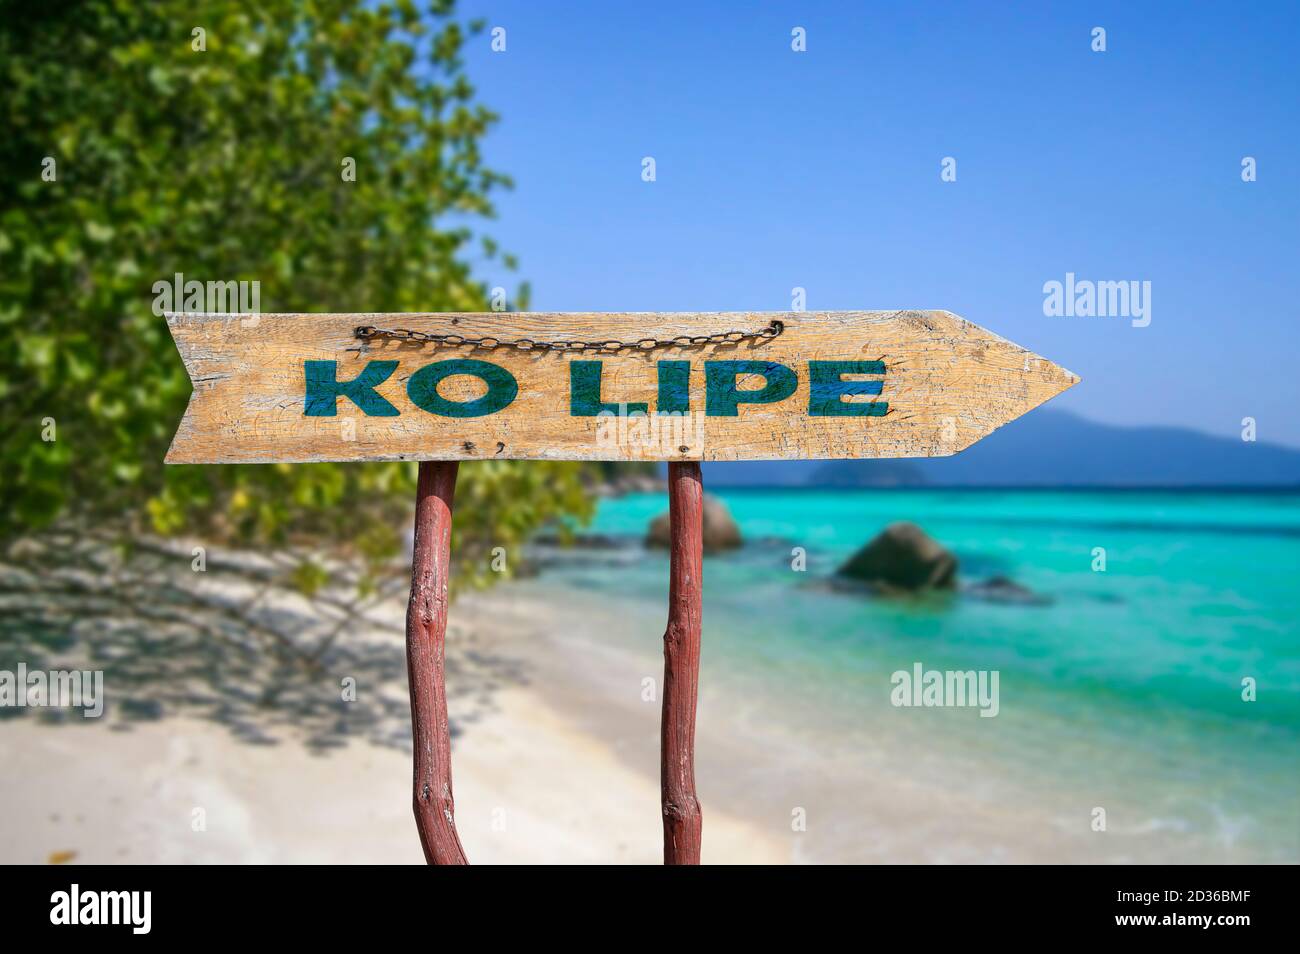 Ko Lipe wooden arrow road sign against tropical beach with white sand and turquoise water background. Travel and relaxation concept. Stock Photo